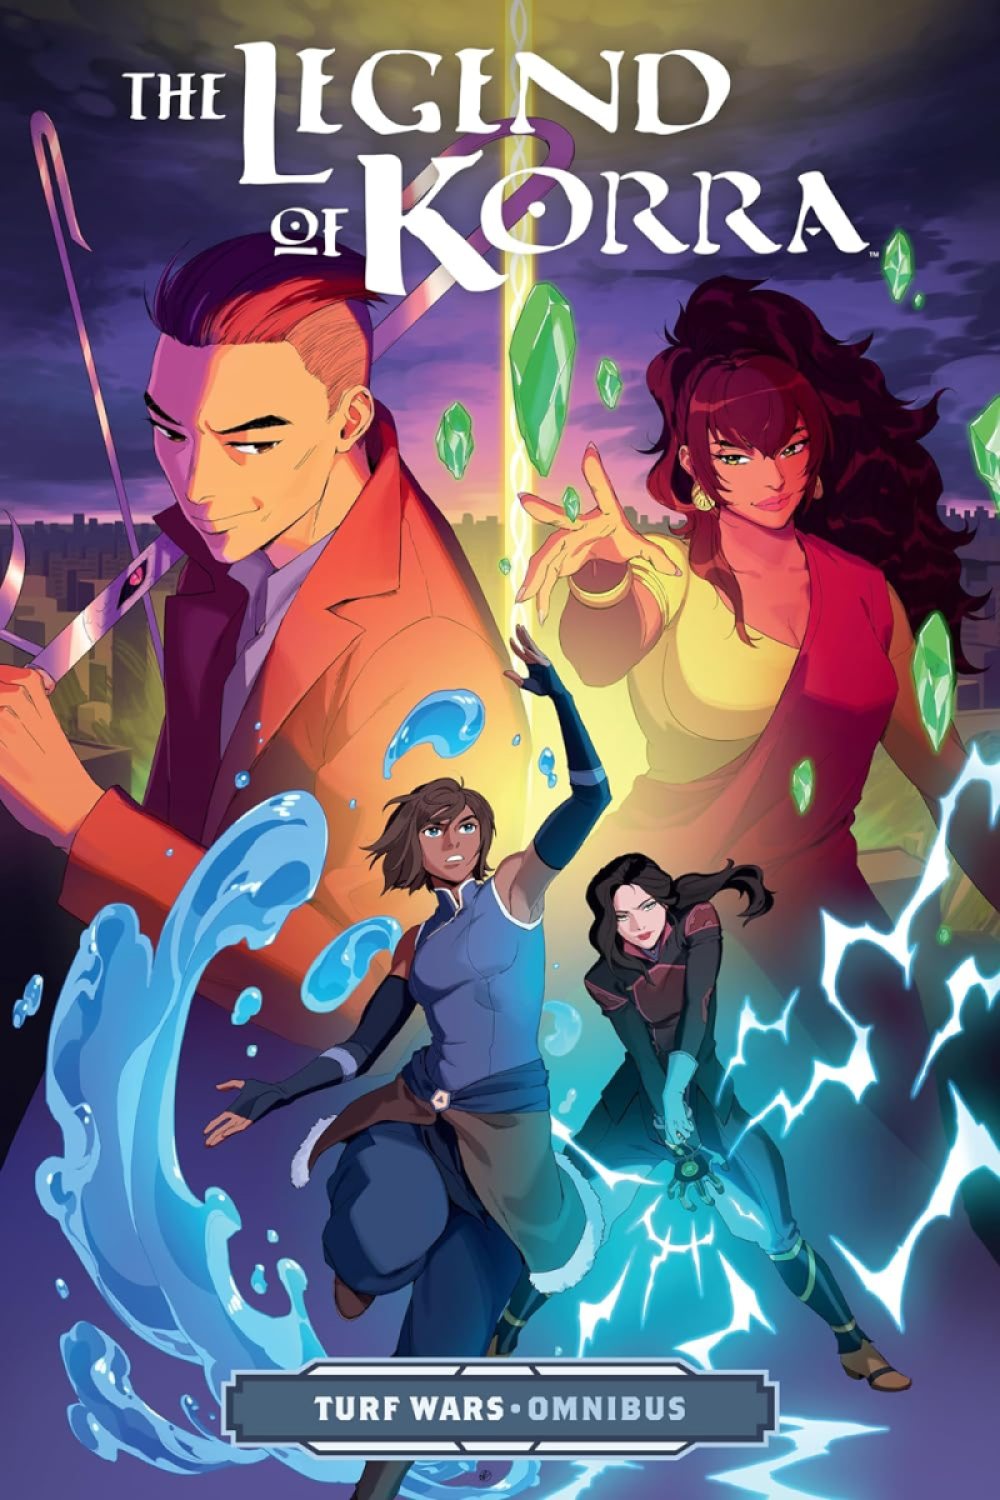 The cover for The Legend of Korra: Turf Wars omnibus, featuring Korra, Asami, Zhu Li, and Tokuga